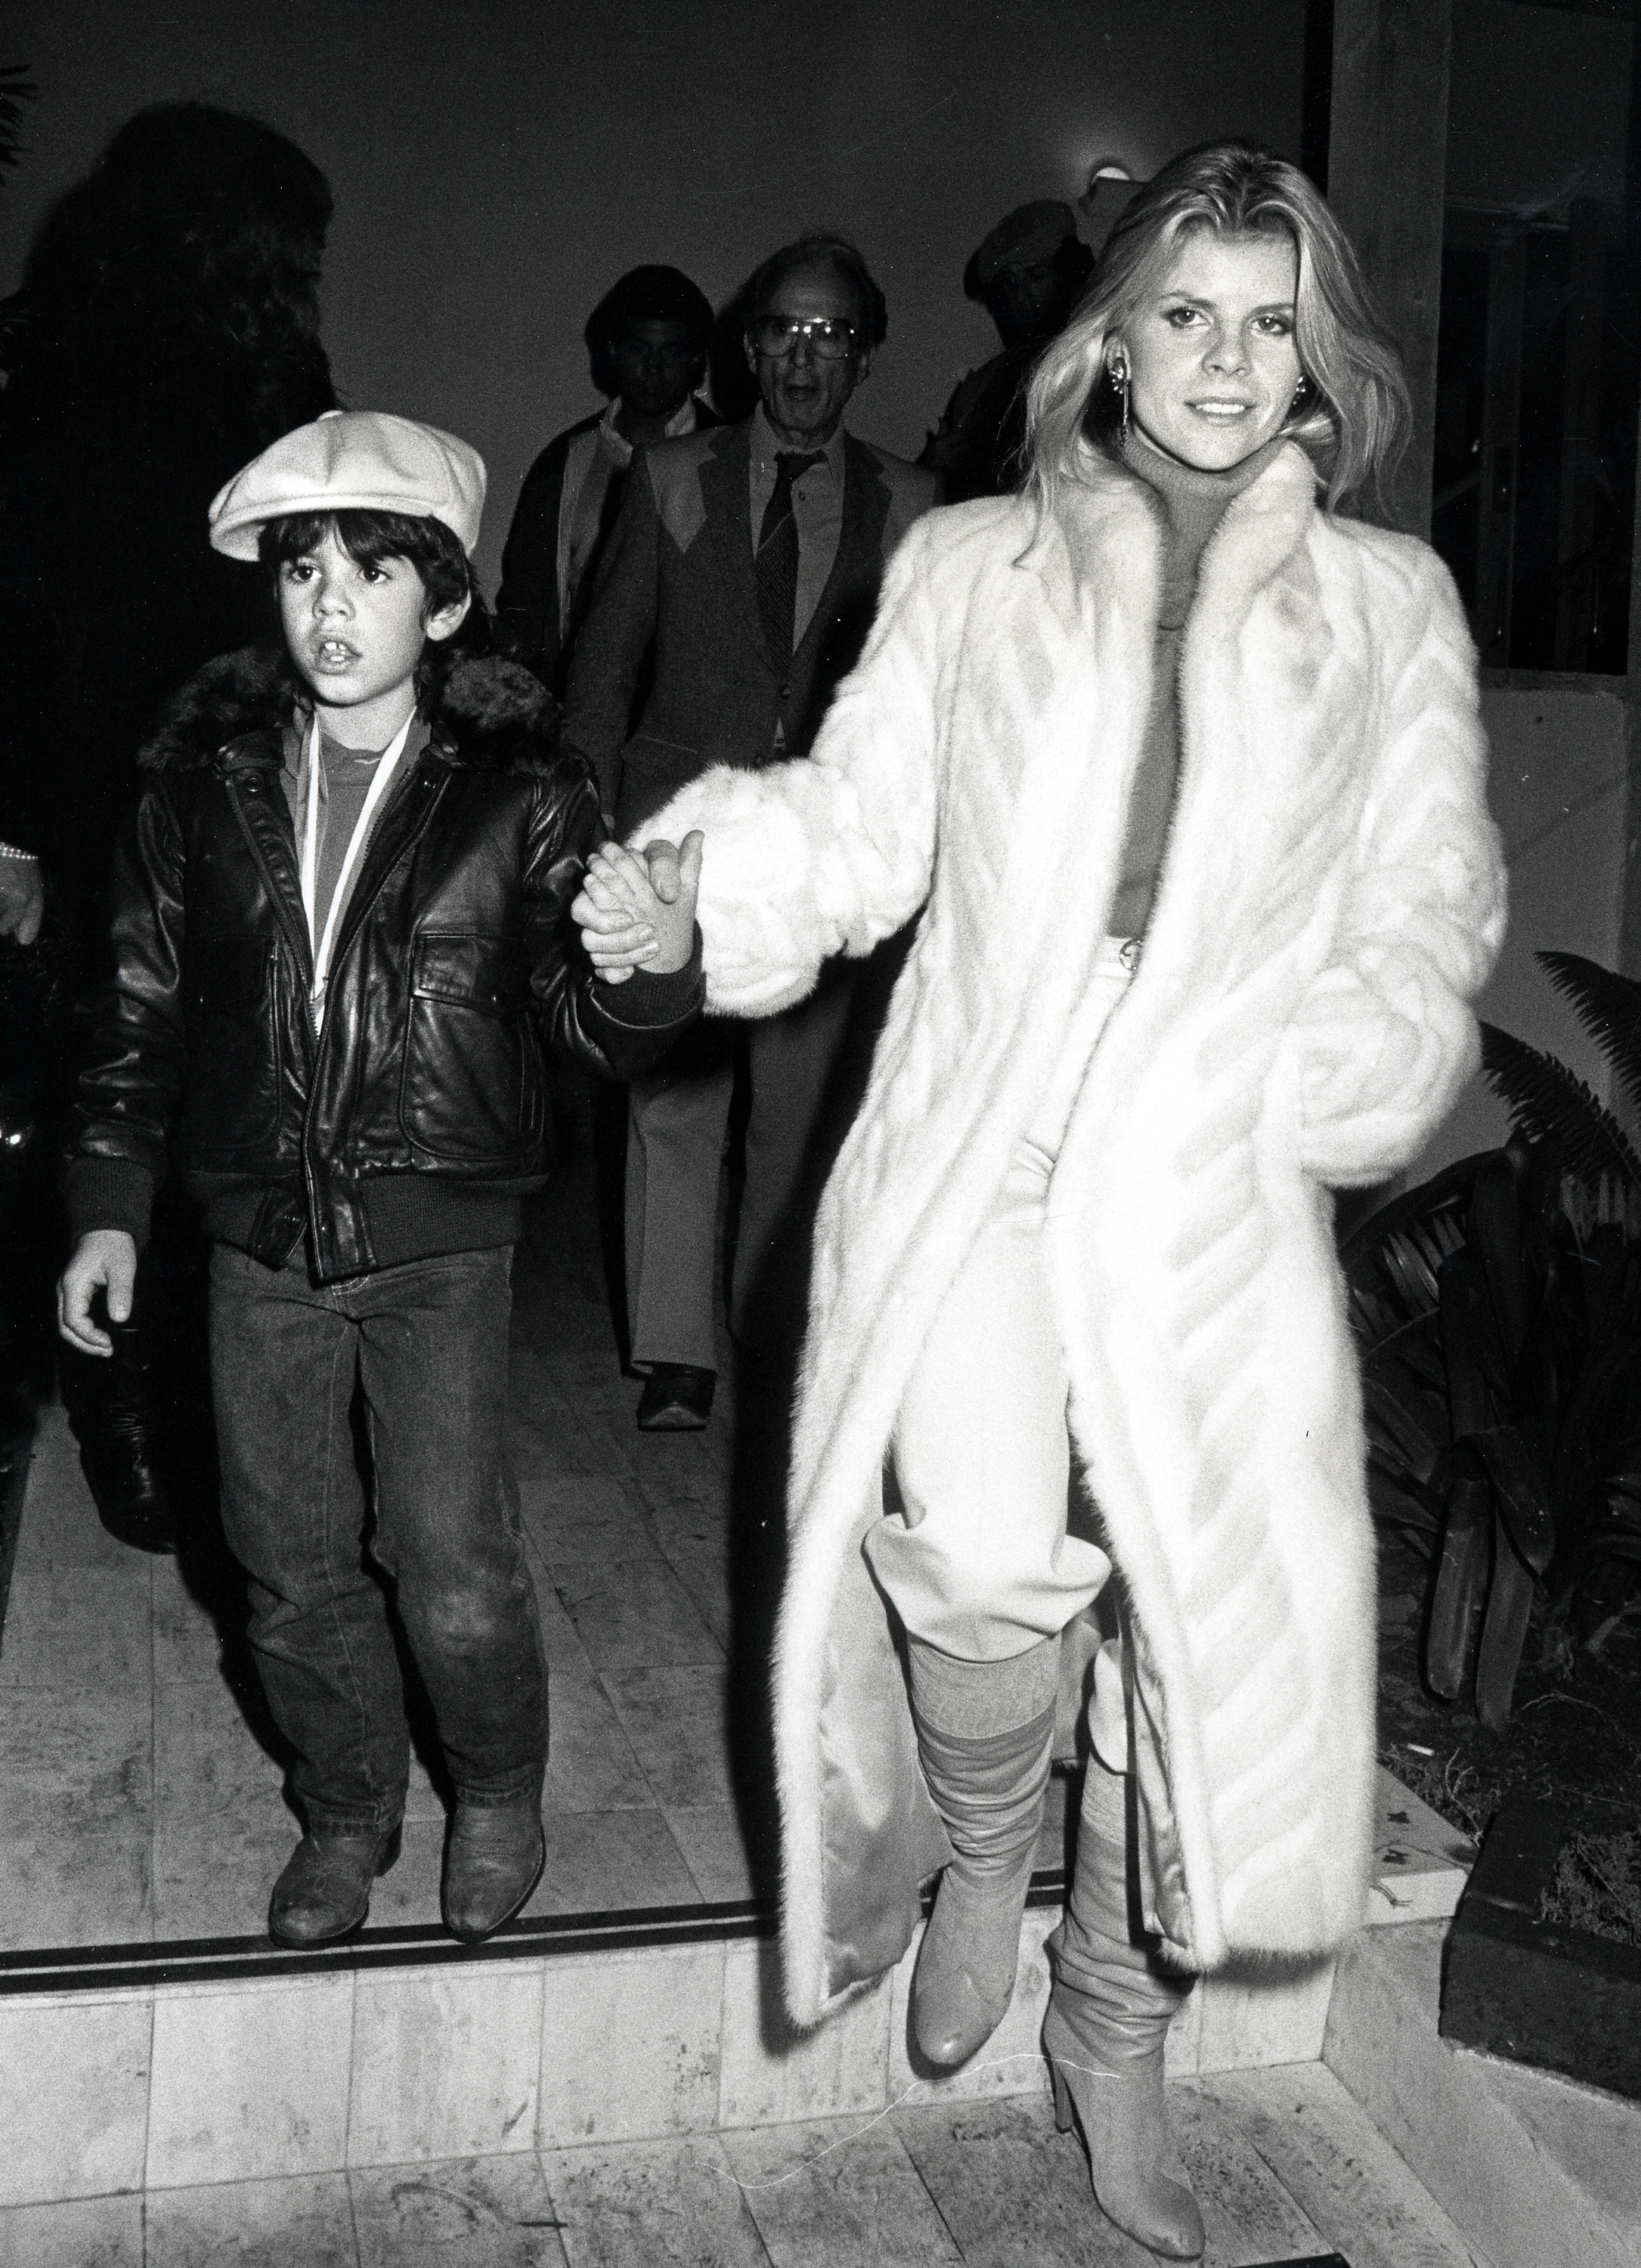 The boy and his mother at Spago's Restaurant in Beverly Hills on December 1, 1983 | Source: Getty Images